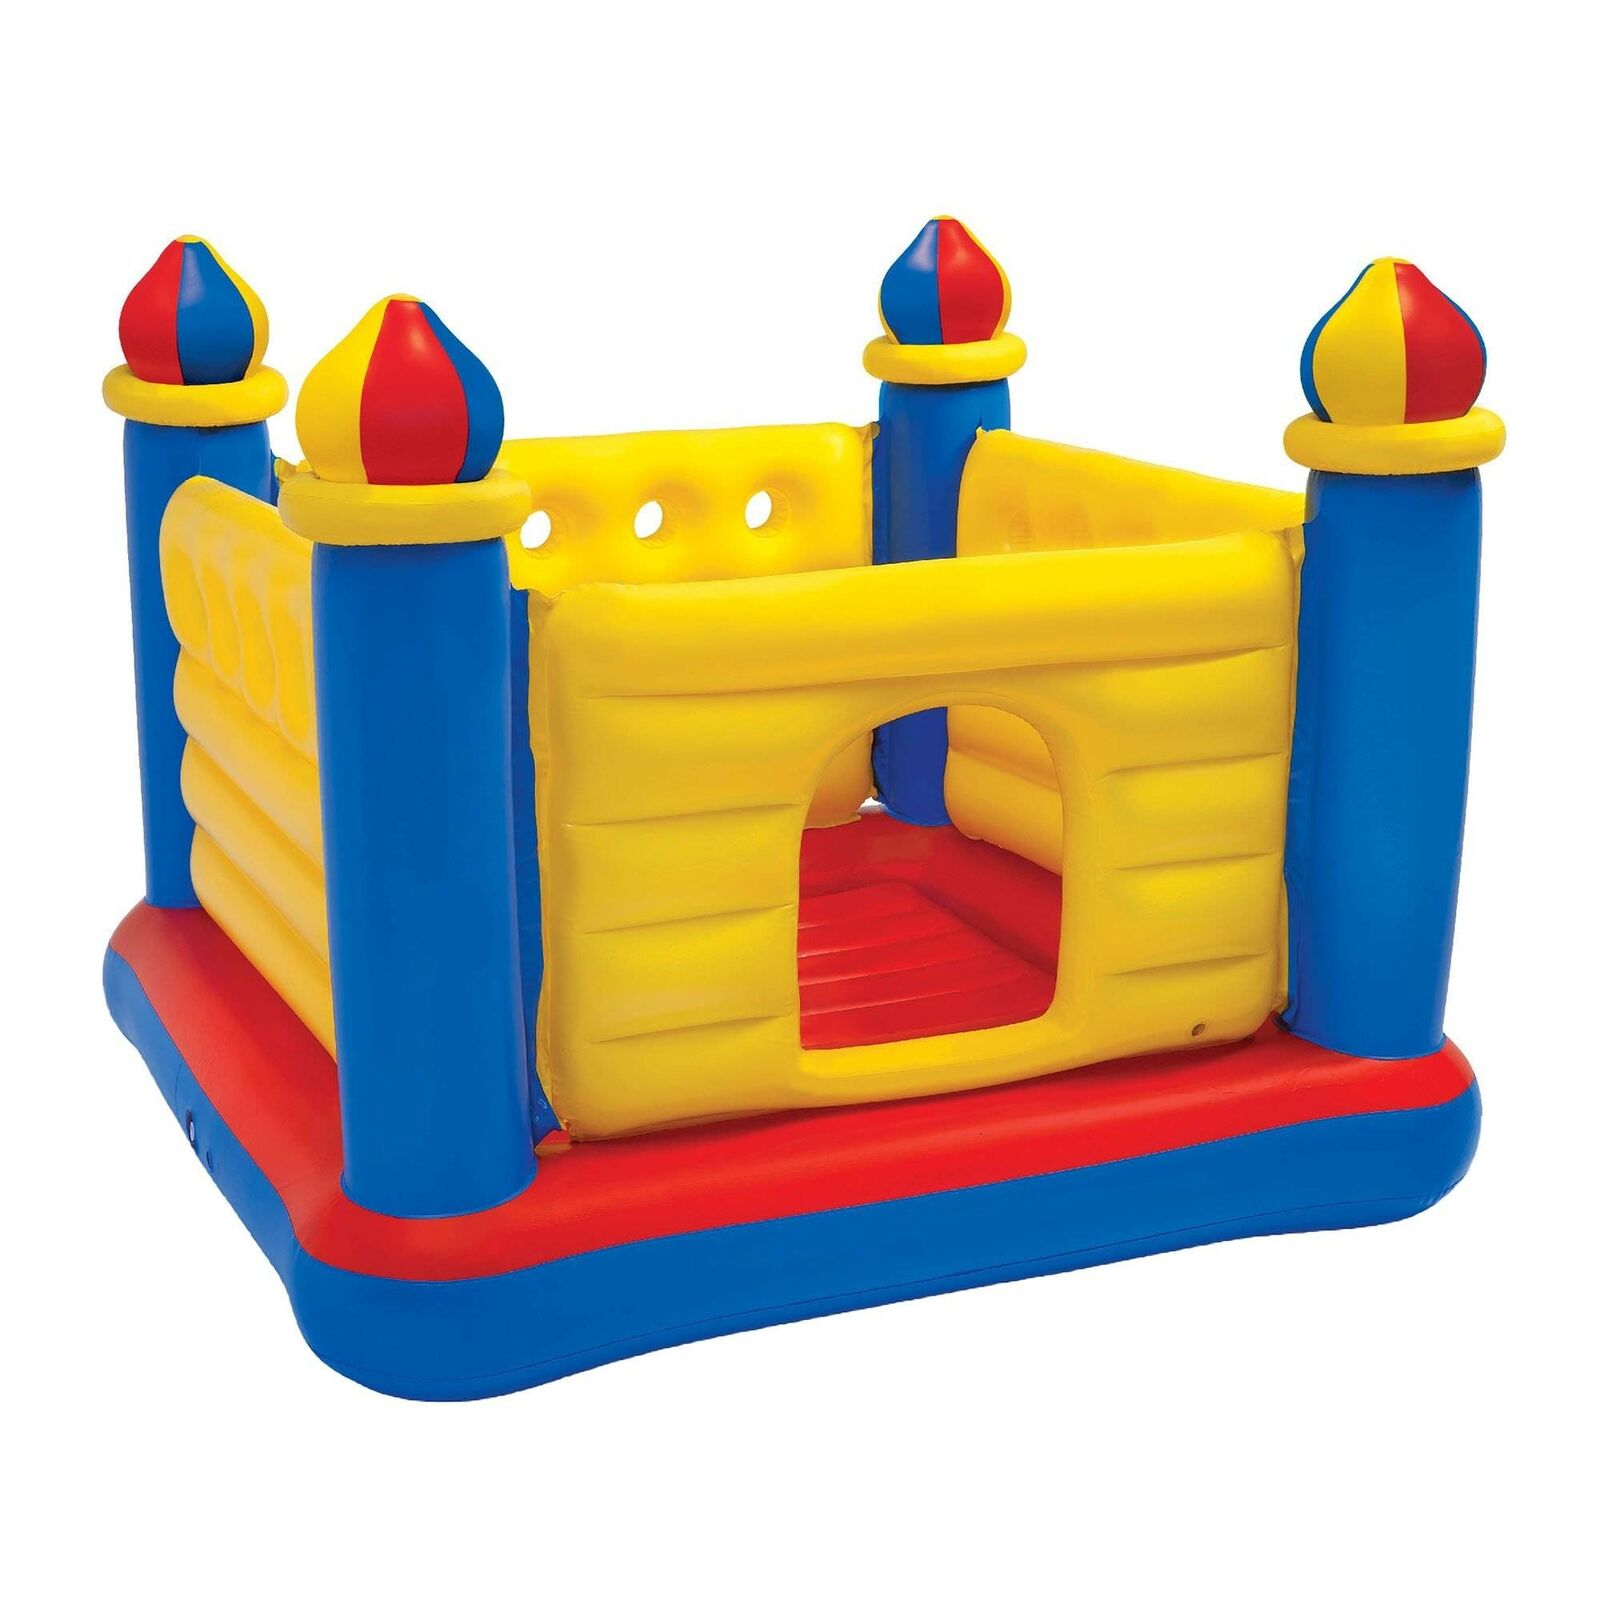 Intex Inflatable Colorful Jump-O-Lene Castle Ball Pit and Bounce House, Ages 3-6